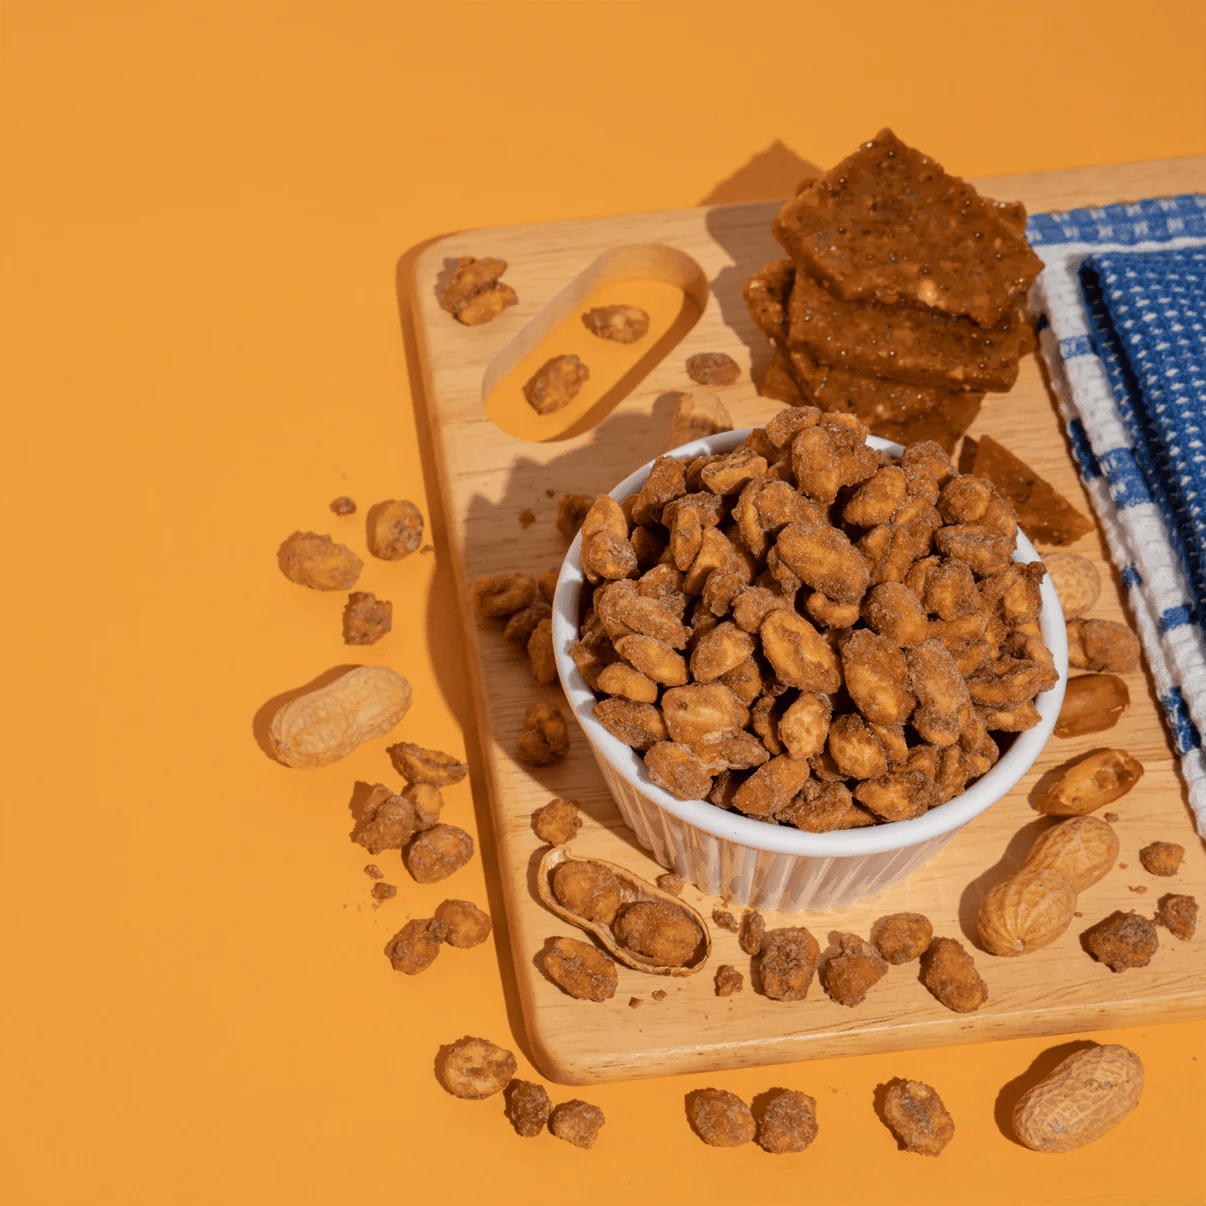 Snack Hacks: Why Earthside Farms' Single-Serve and Enough-to-Share Peanuts Are a Must-Try - Earthside Farms